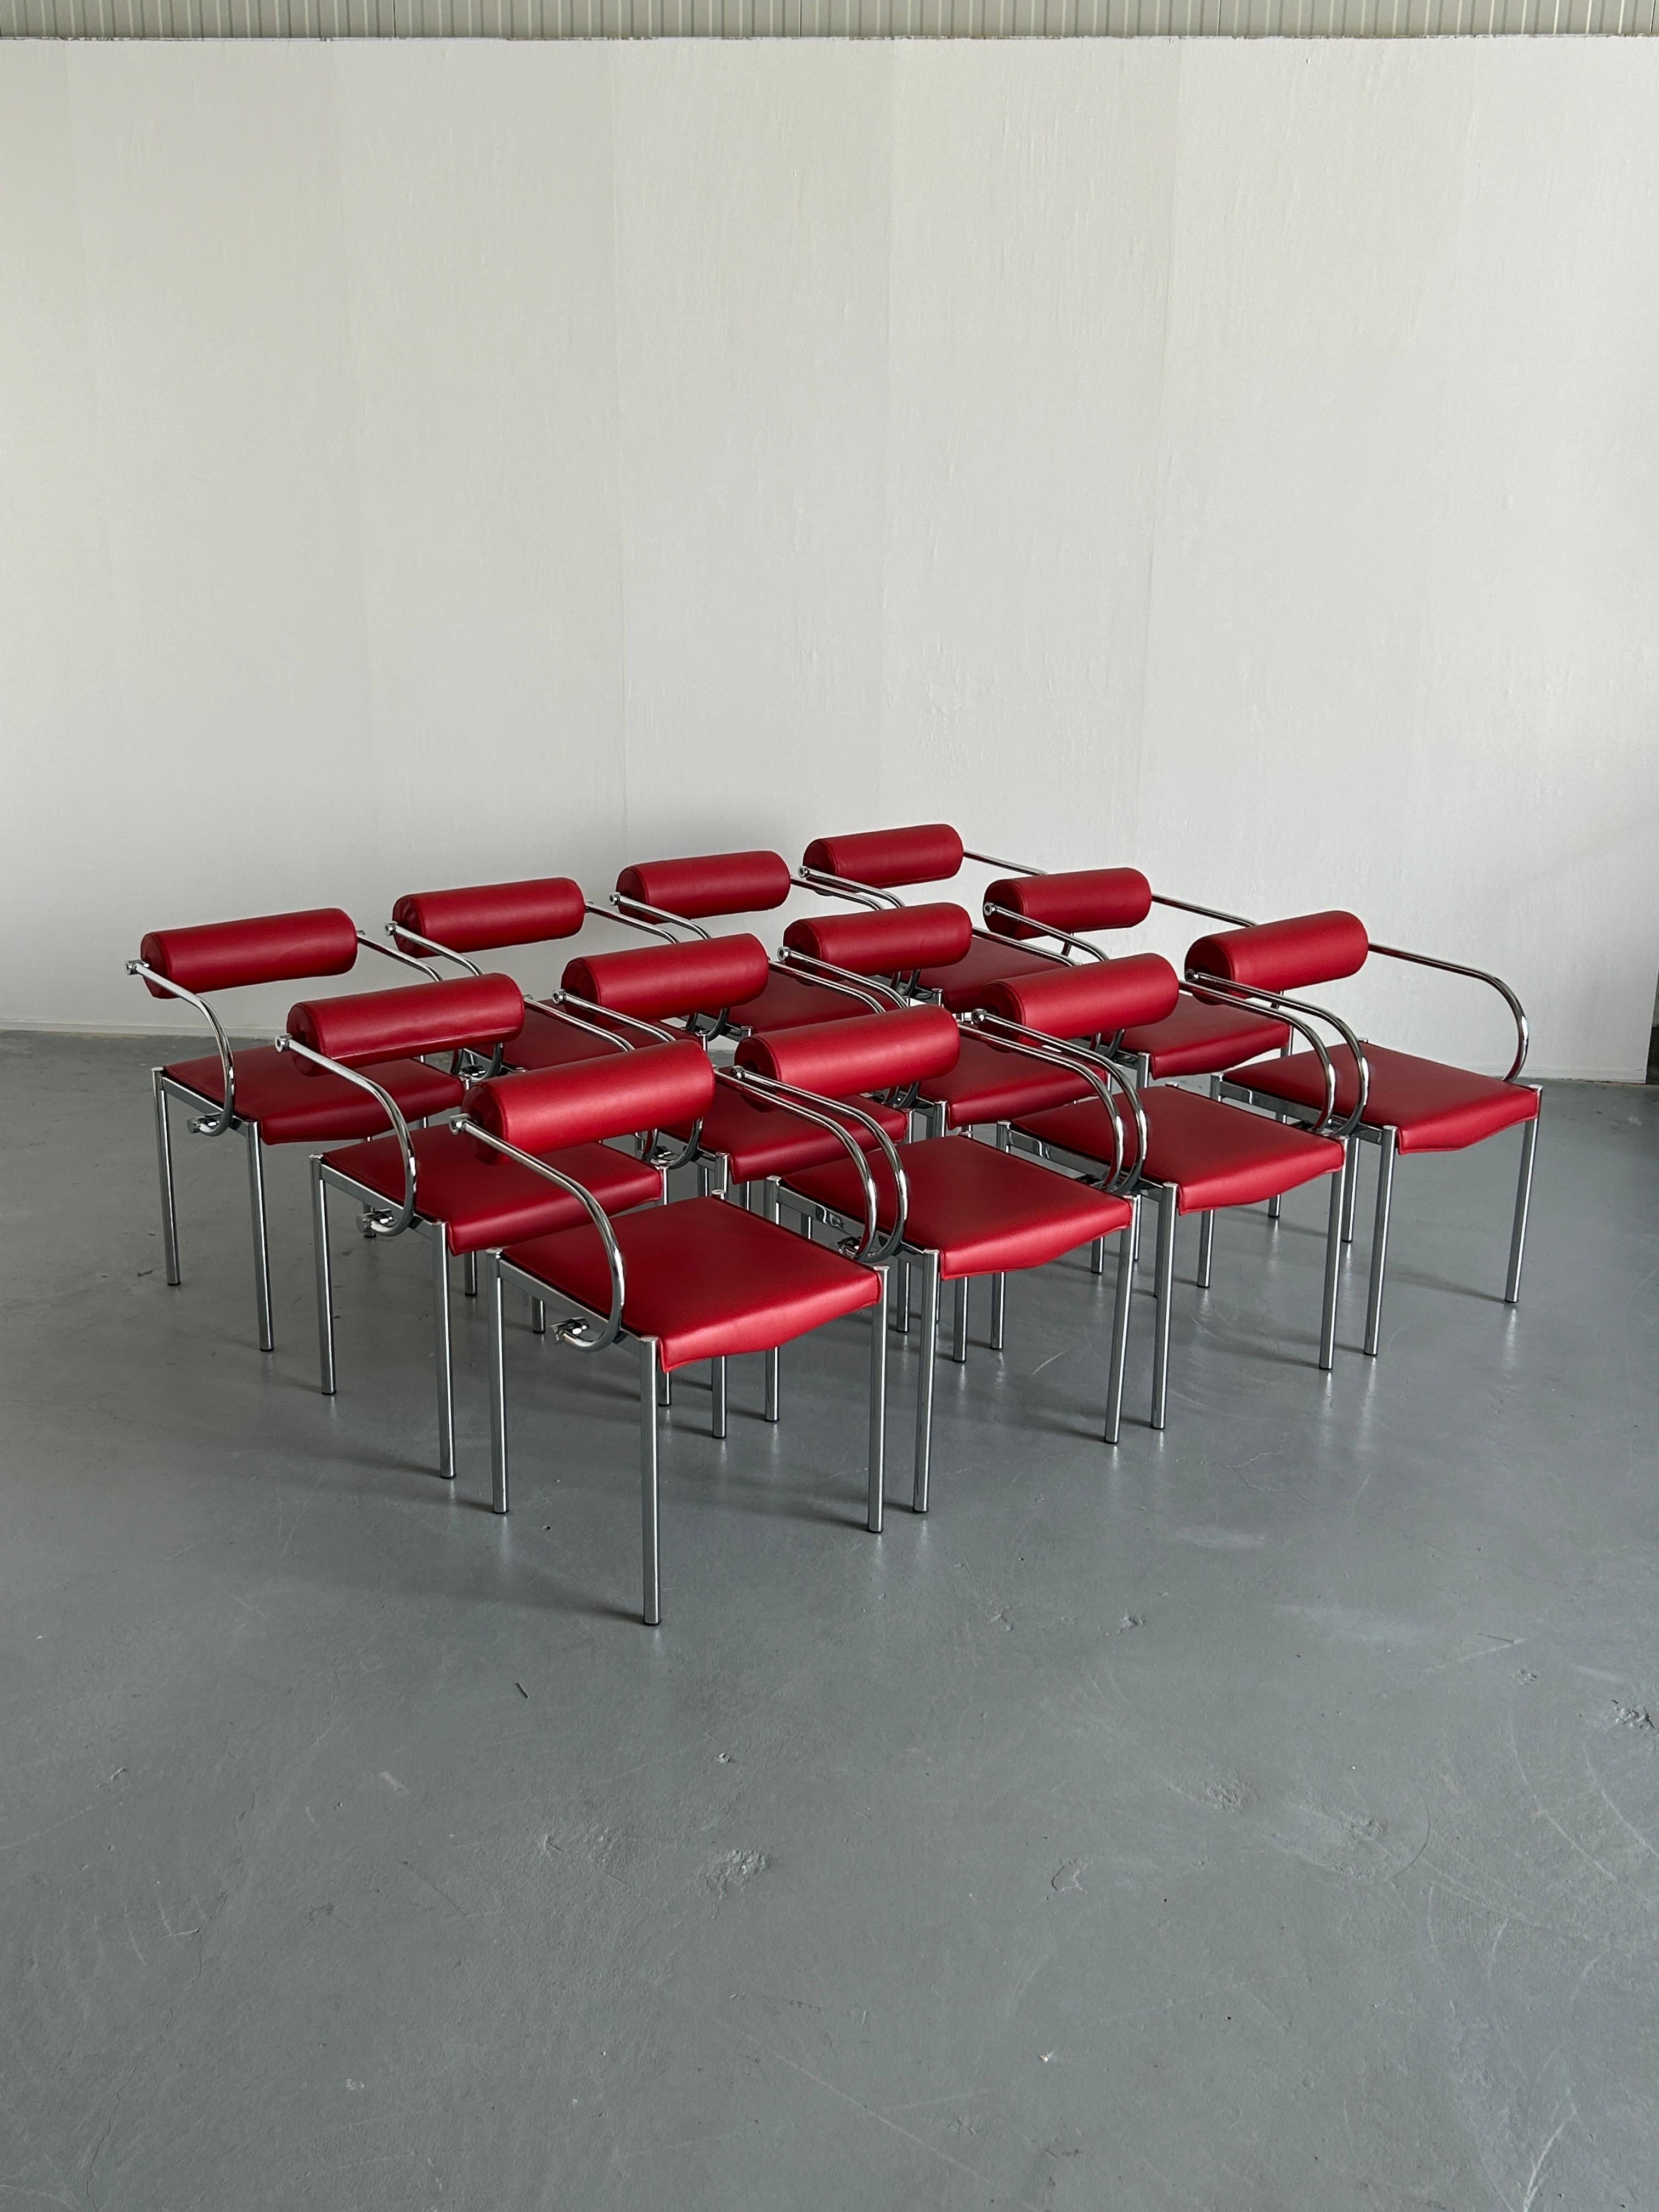 Set of twelve postmodern tubular steel and red faux leather dining chairs, in the style of Arcadia by Paolo Piva for B&B Italia, 1980s
Very quality vintage Italian production from the late 1980s or early 1990s.

In very good vintage condition